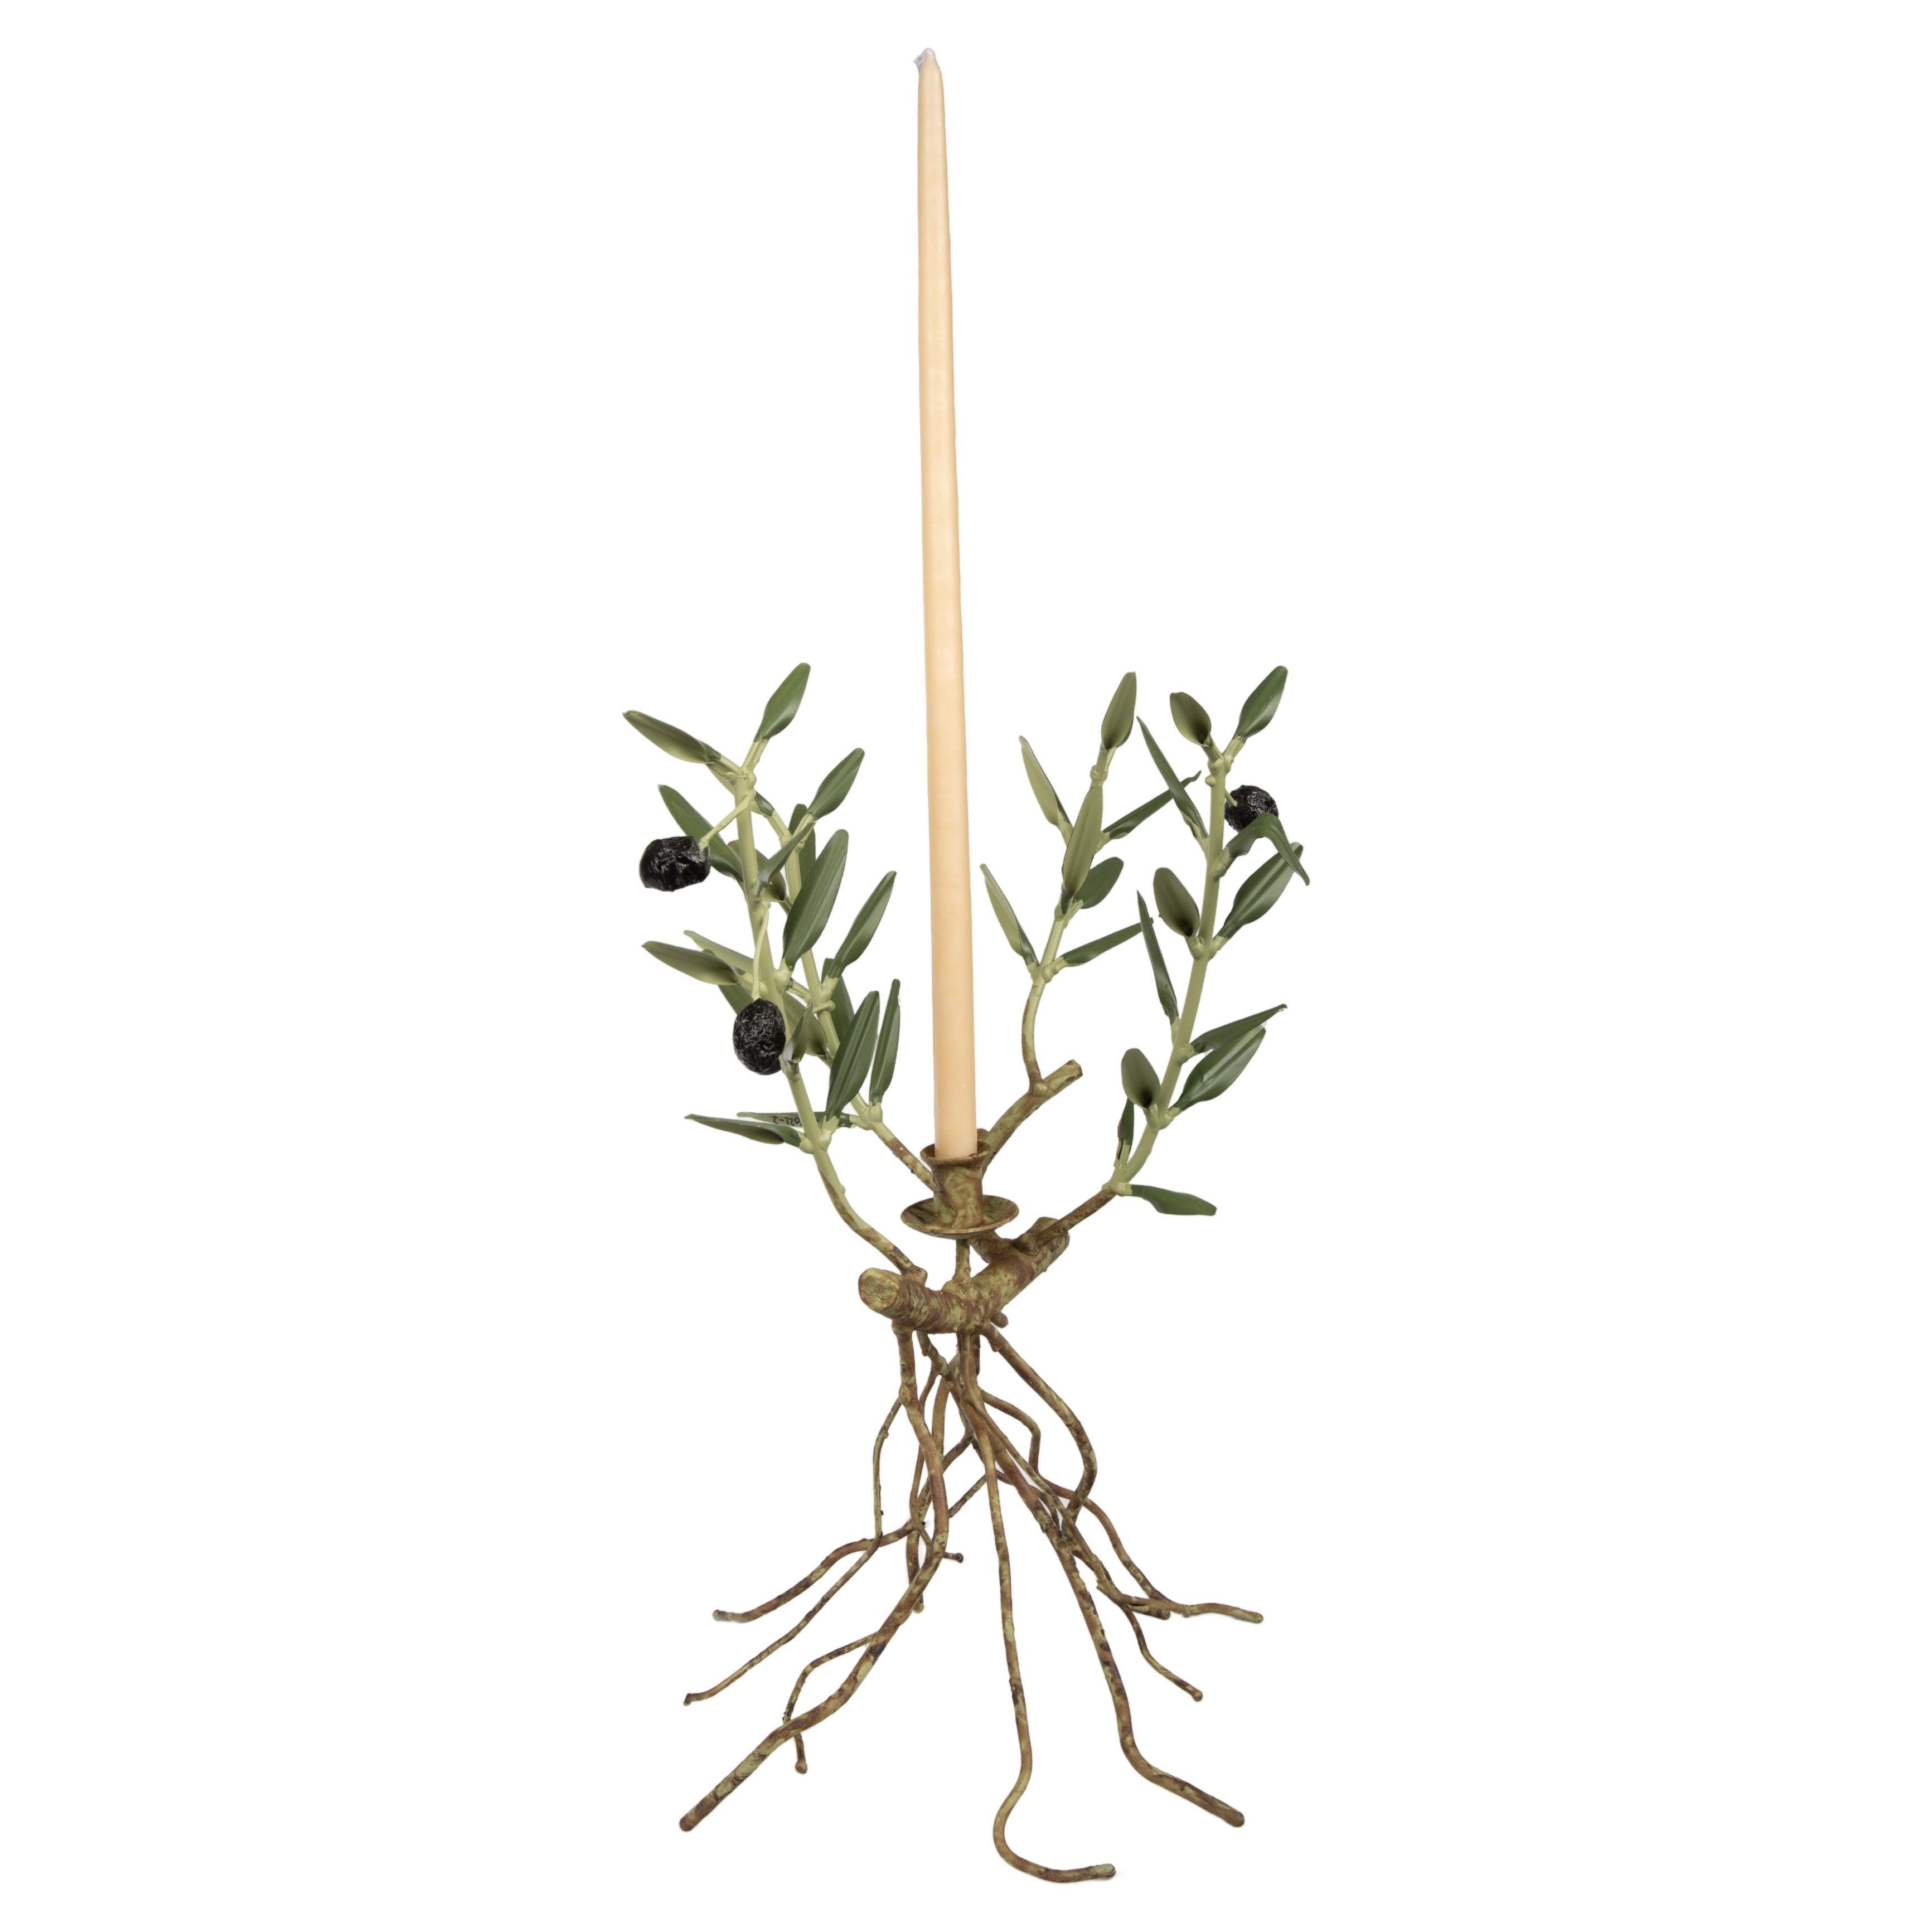 Handmade Olive Branch with Roots Candle Holder from Provence